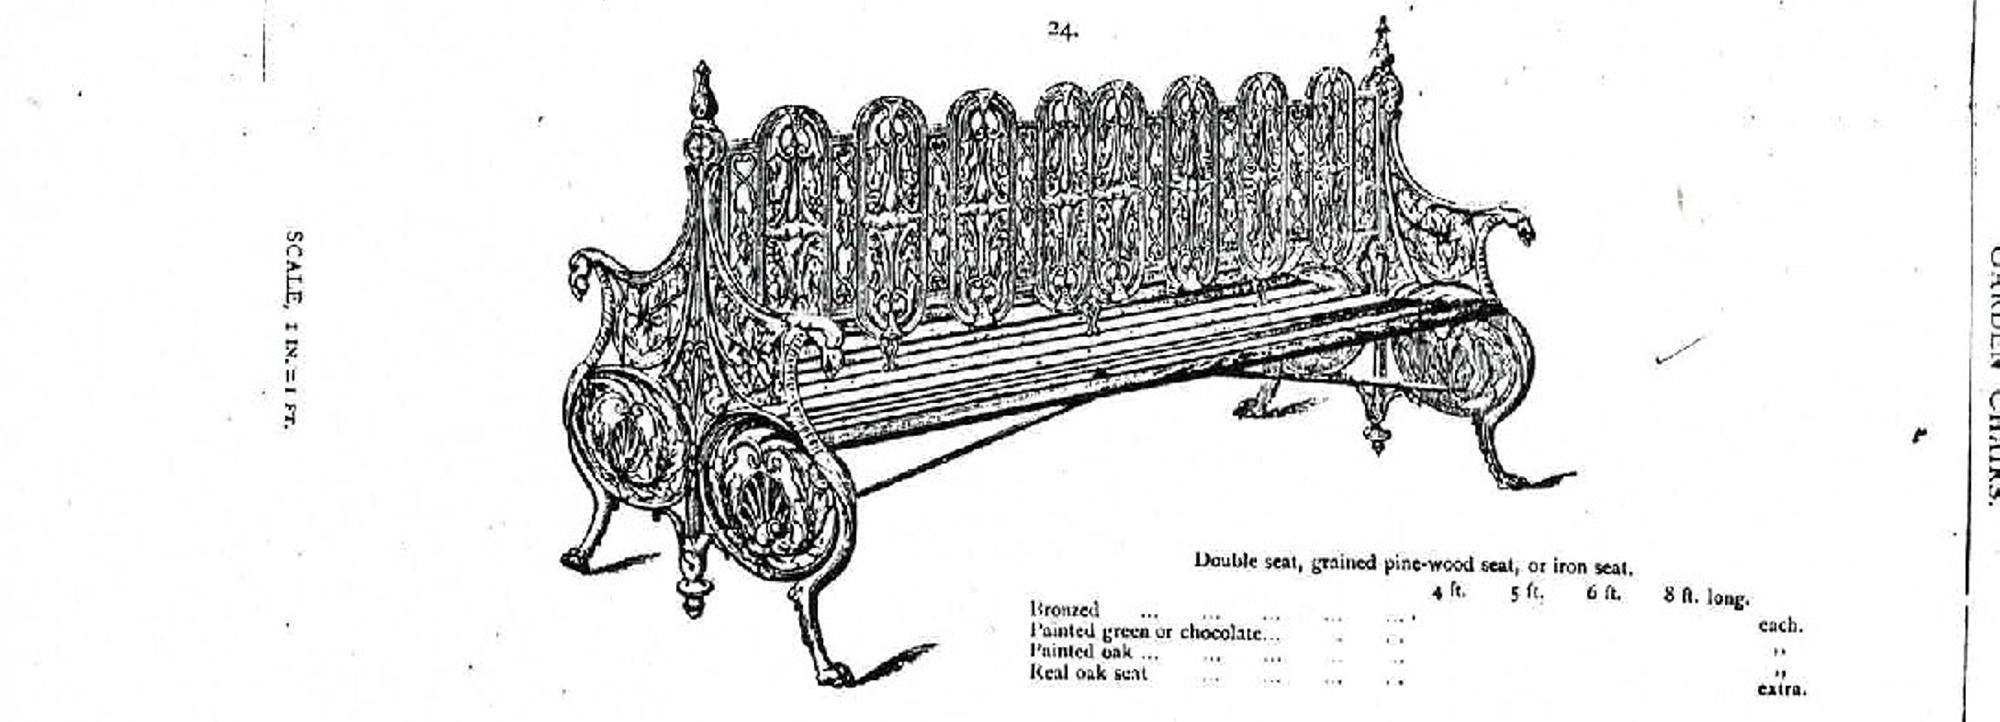 Garden seats: A Coalbrookdale cast iron seat, 2nd half 19th century, marks possibly obscured by - Image 2 of 2